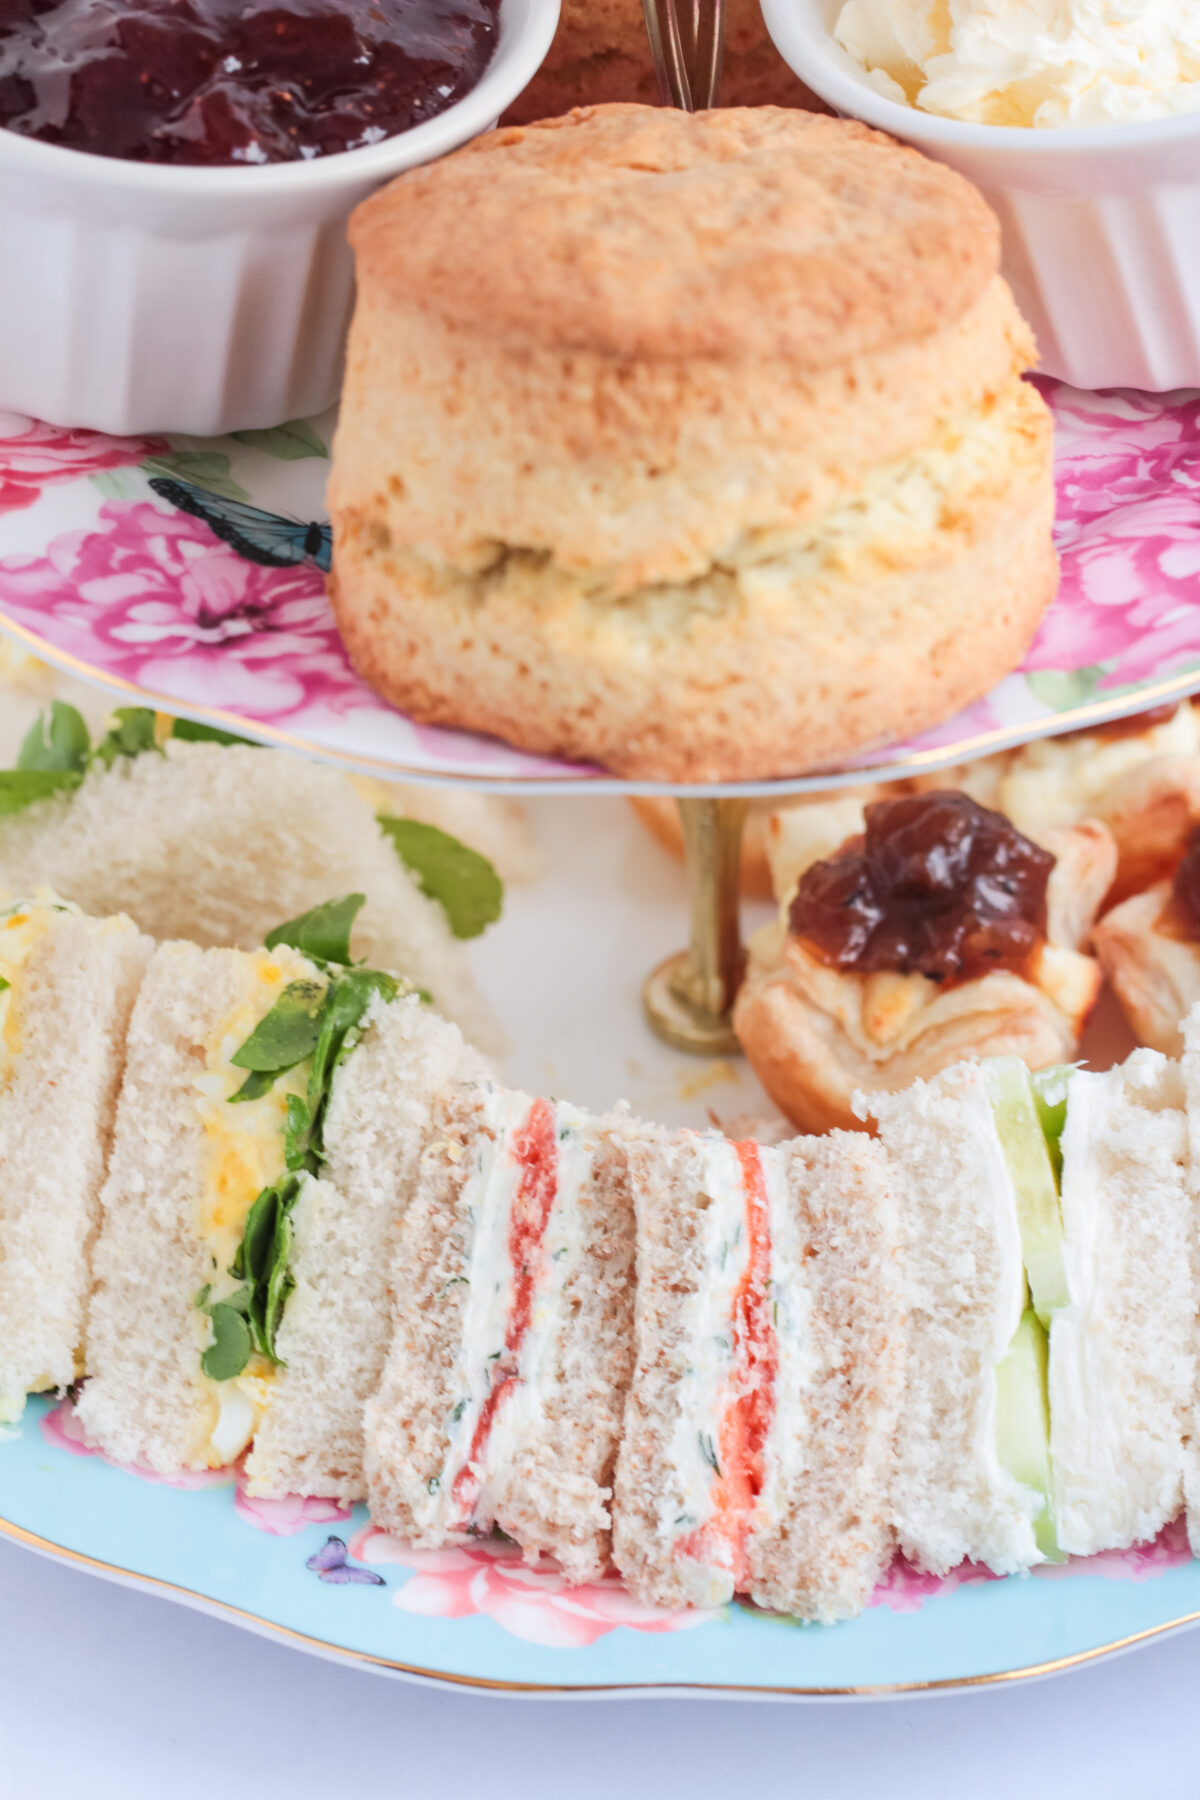 Discover classic afternoon tea sandwiches with our sumptuous egg and cress, refreshing cucumber and cream cheese, and elegant smoked salmon.